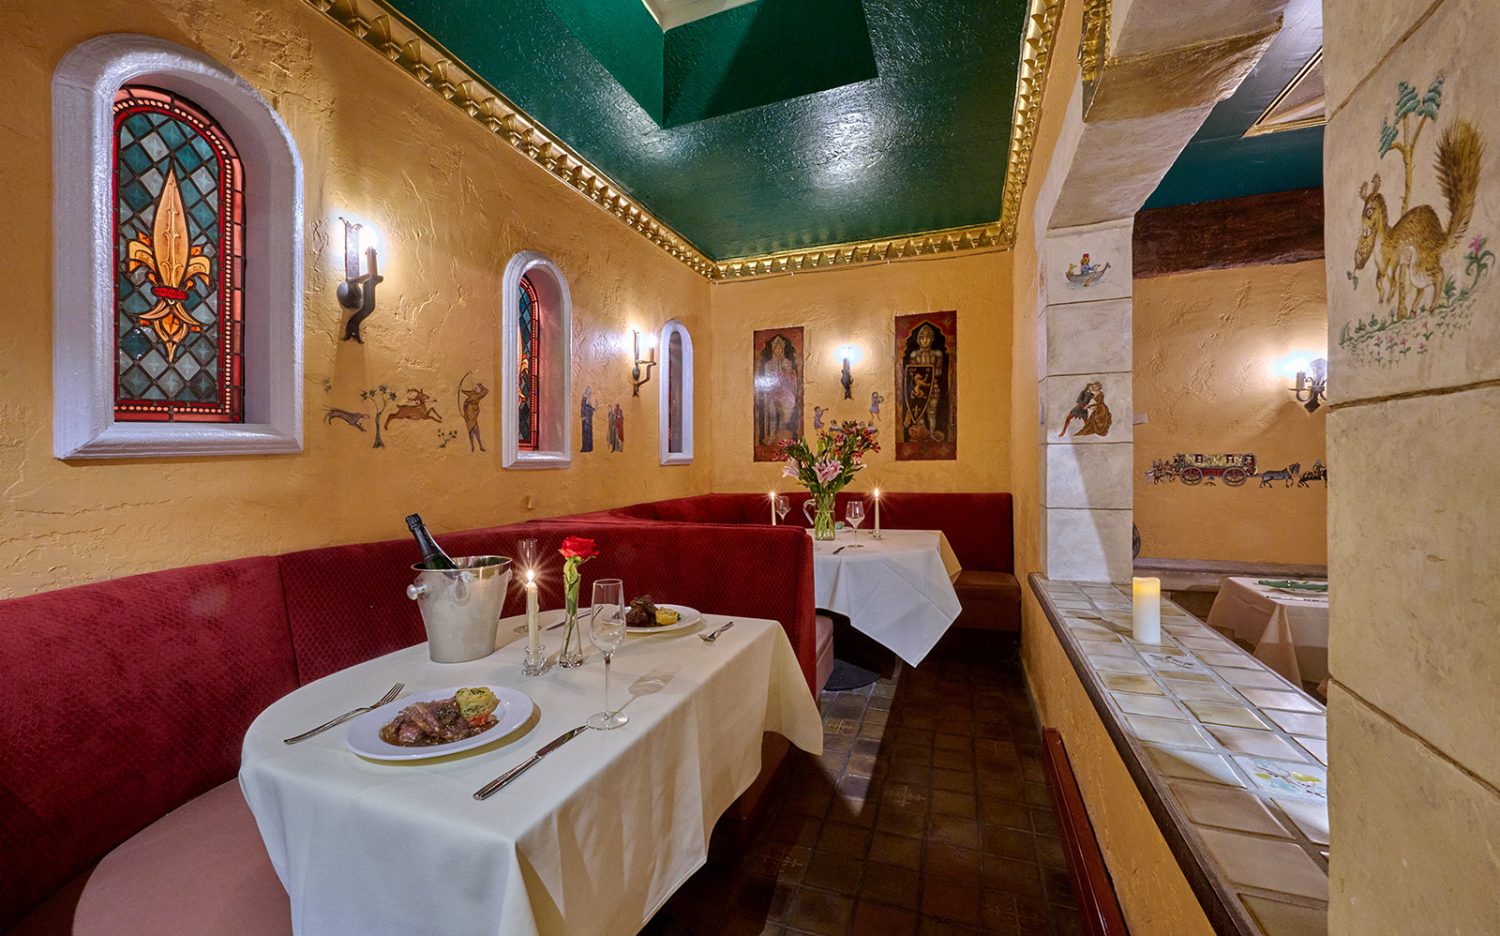 red booths, yellow walls with paintings and loghts hanging, table with tablecloths, food, flowers, and candles